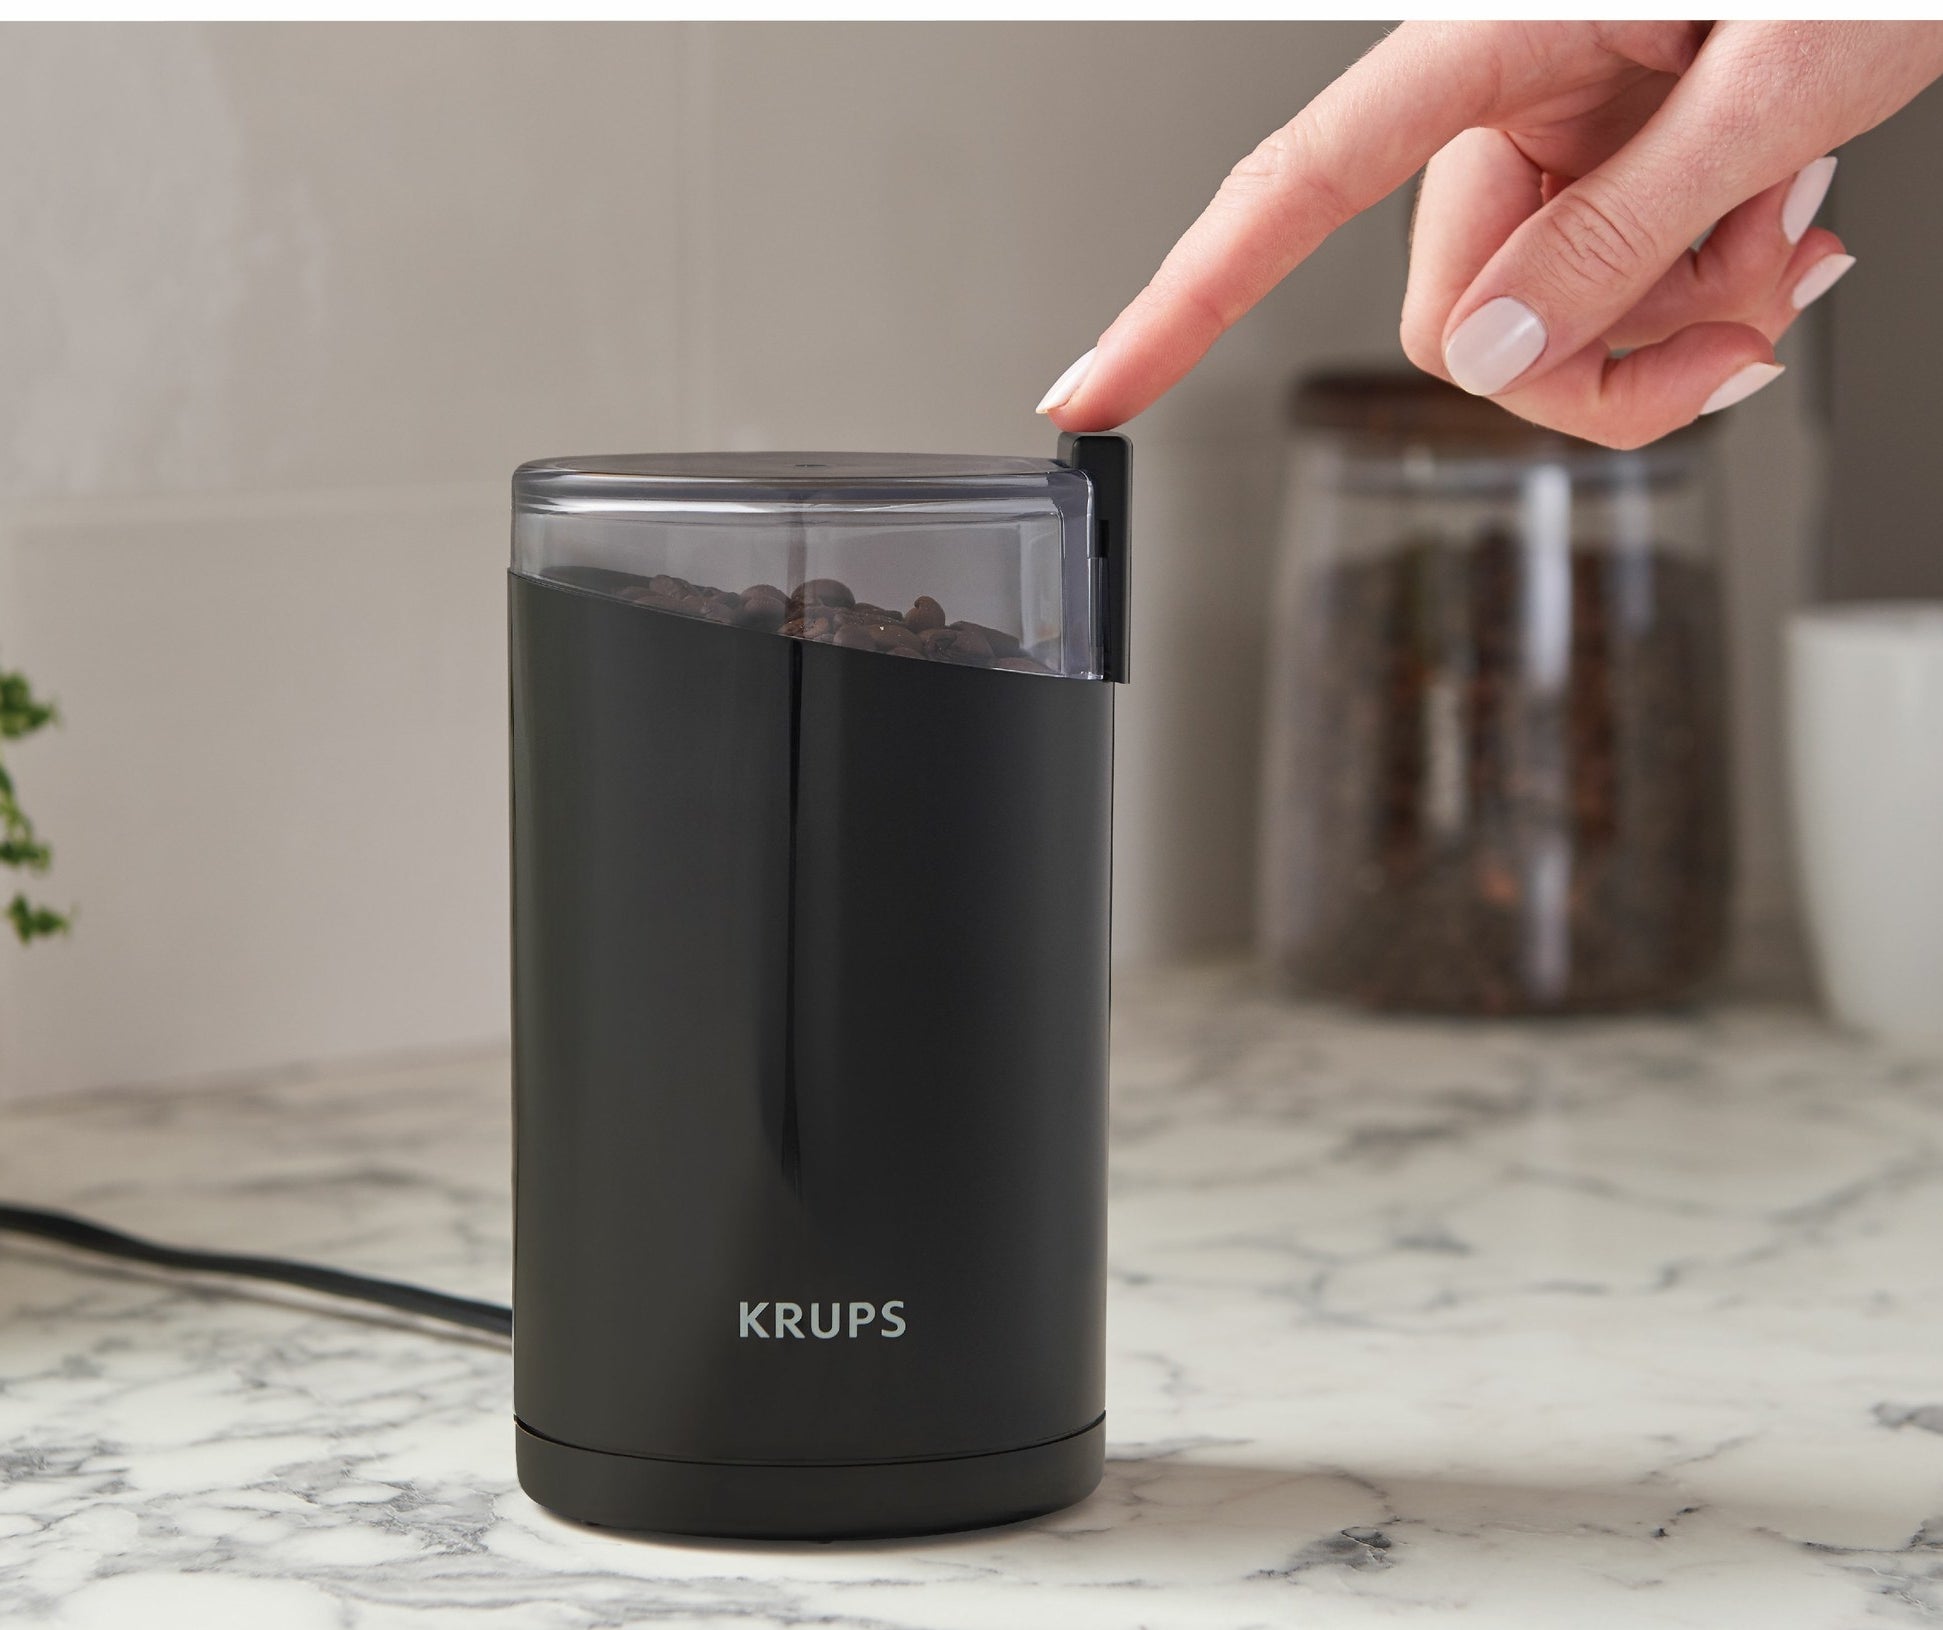 The one-touch electric coffee grinder